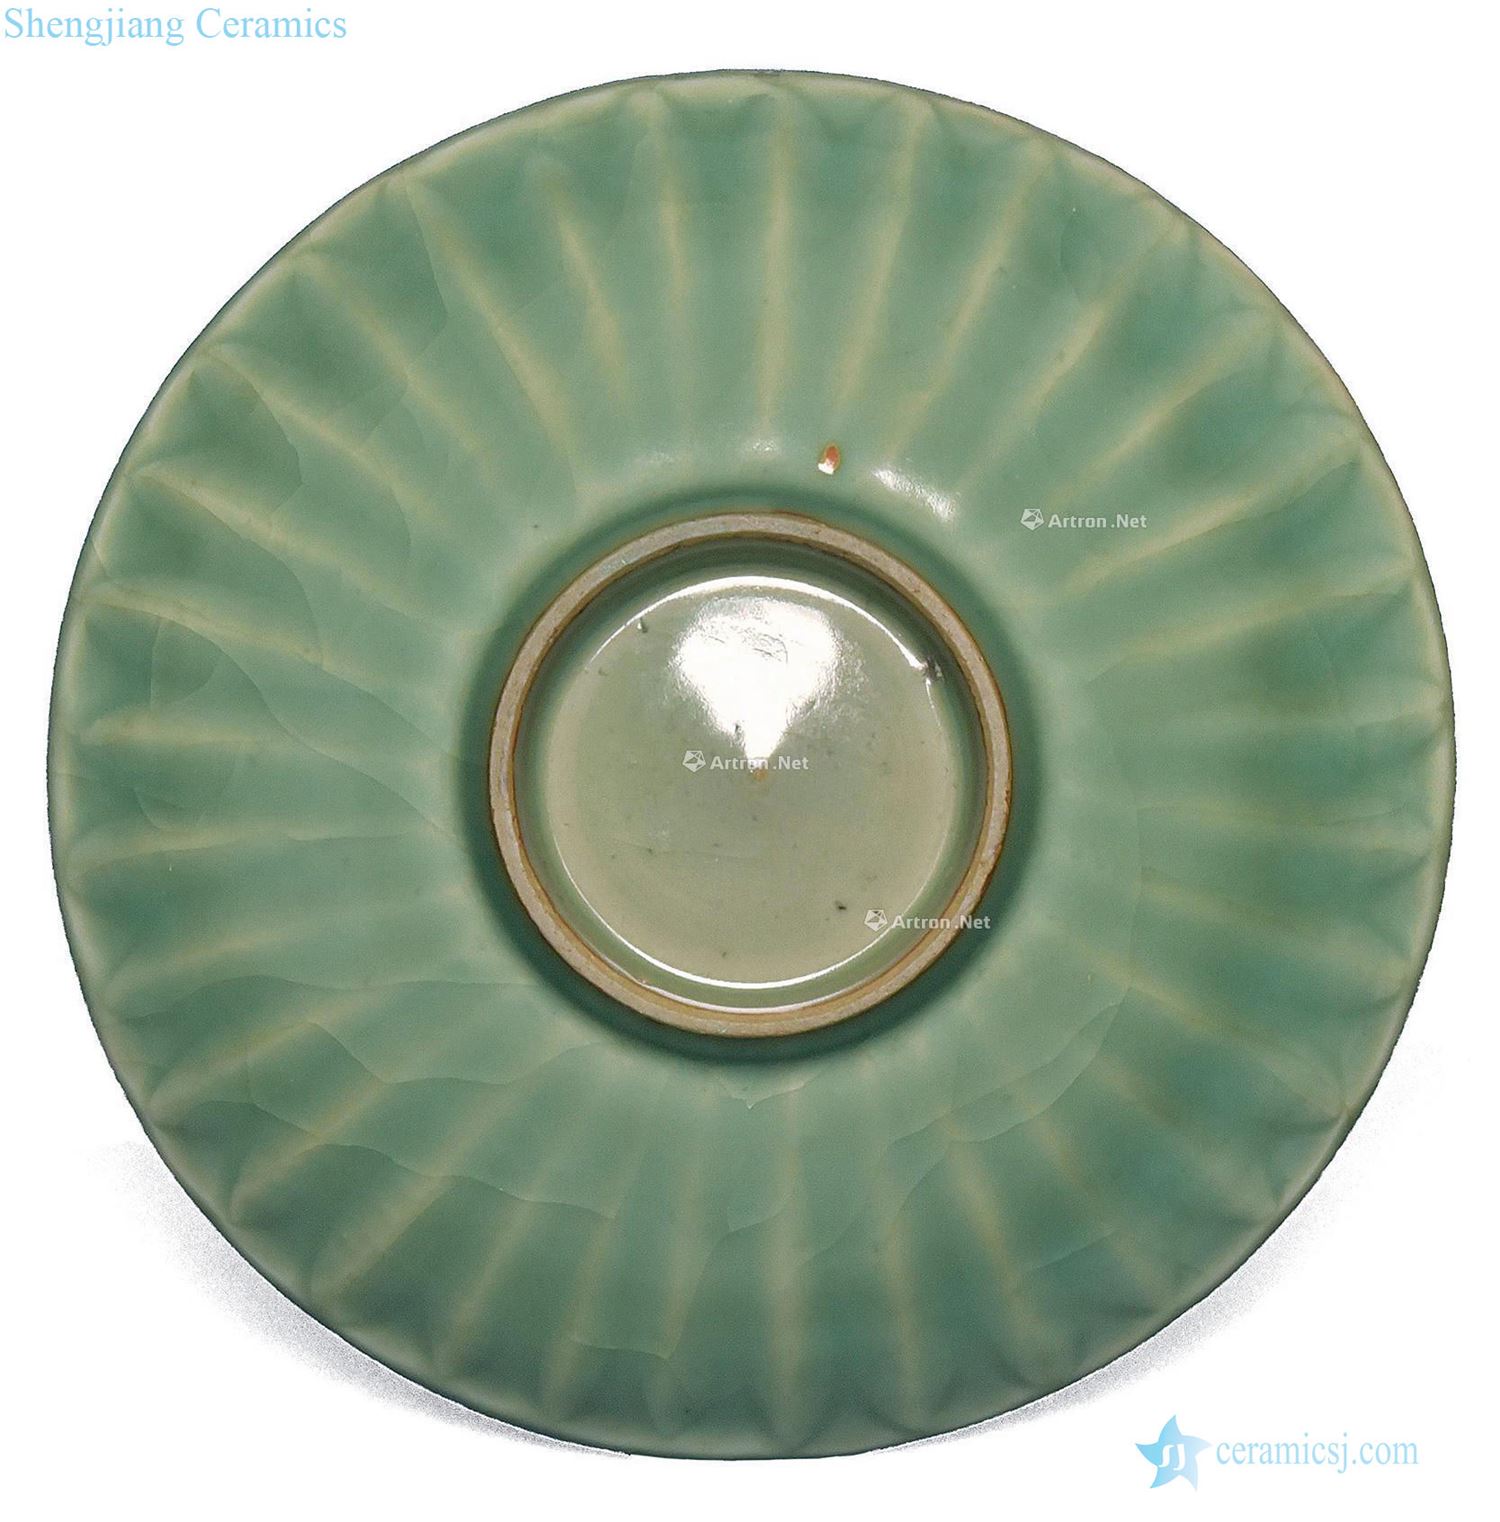 The southern song dynasty Longquan celadon plum green glaze carved lotus valve tray